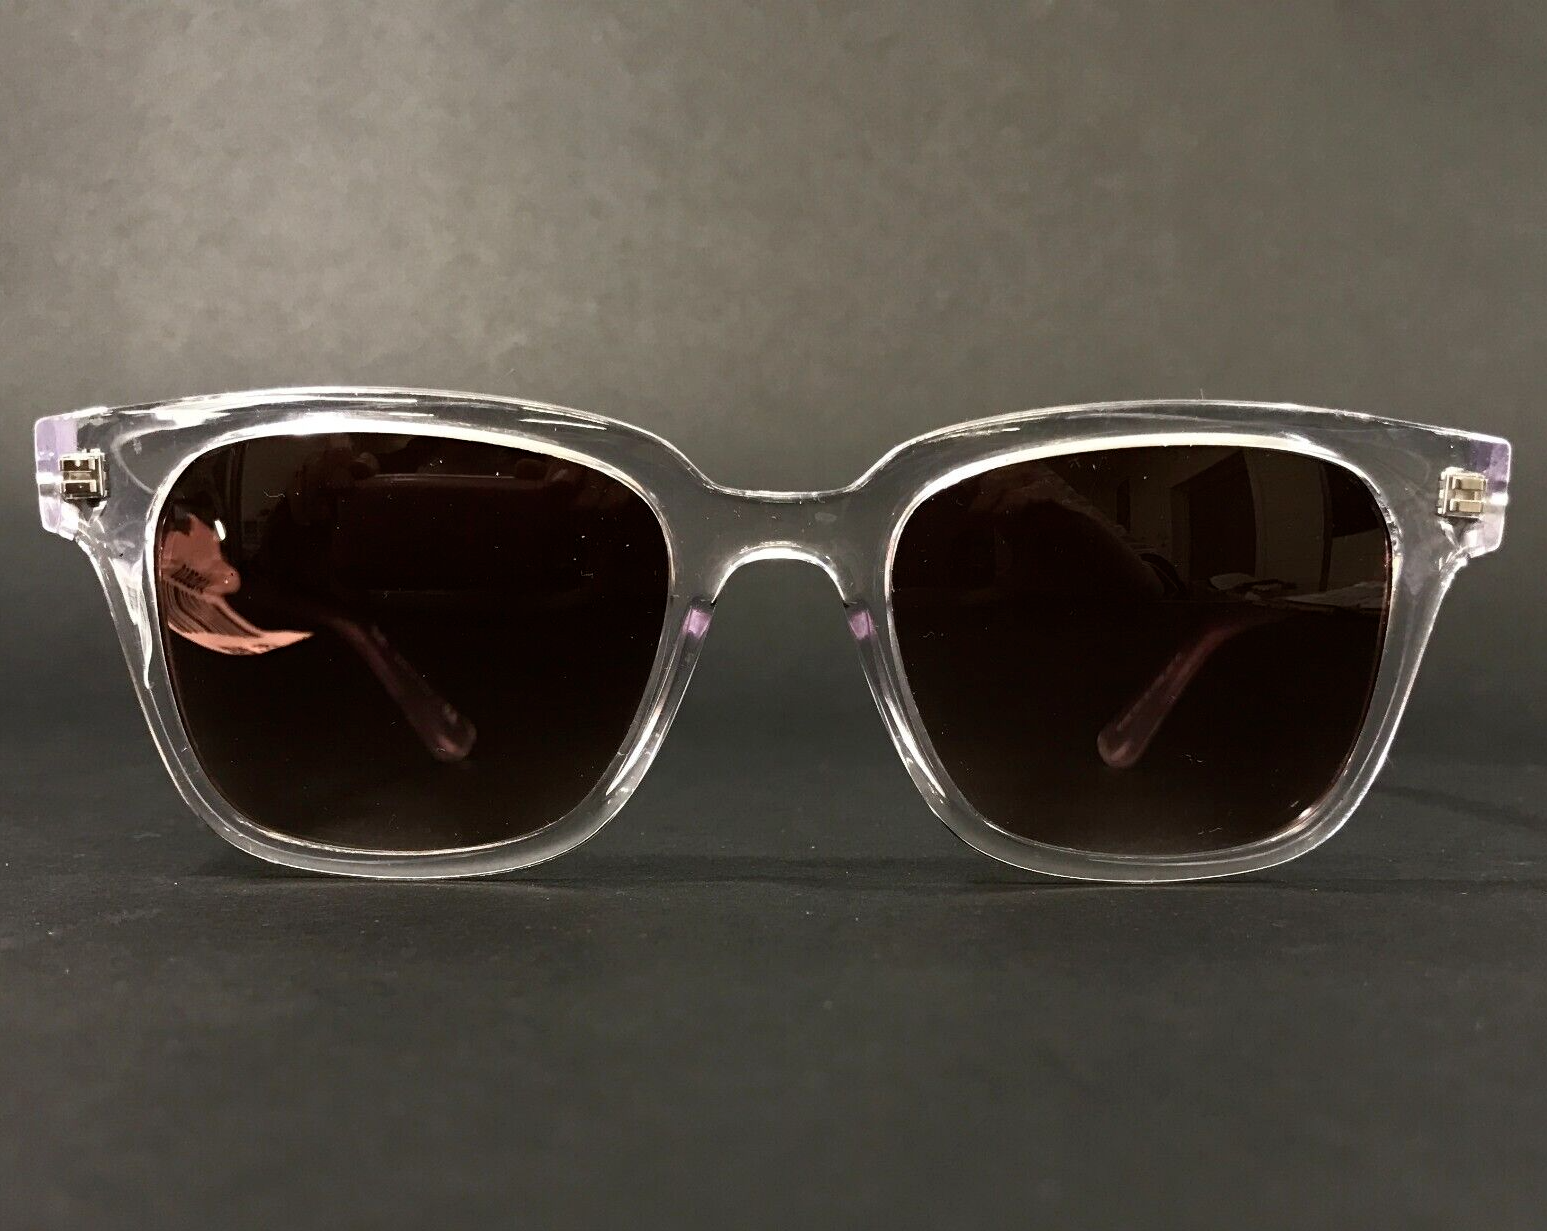 Ray-Ban Sunglasses RB4323 6447/32 Clear Square Frames with Red Lenses 51-20-150 - $111.98